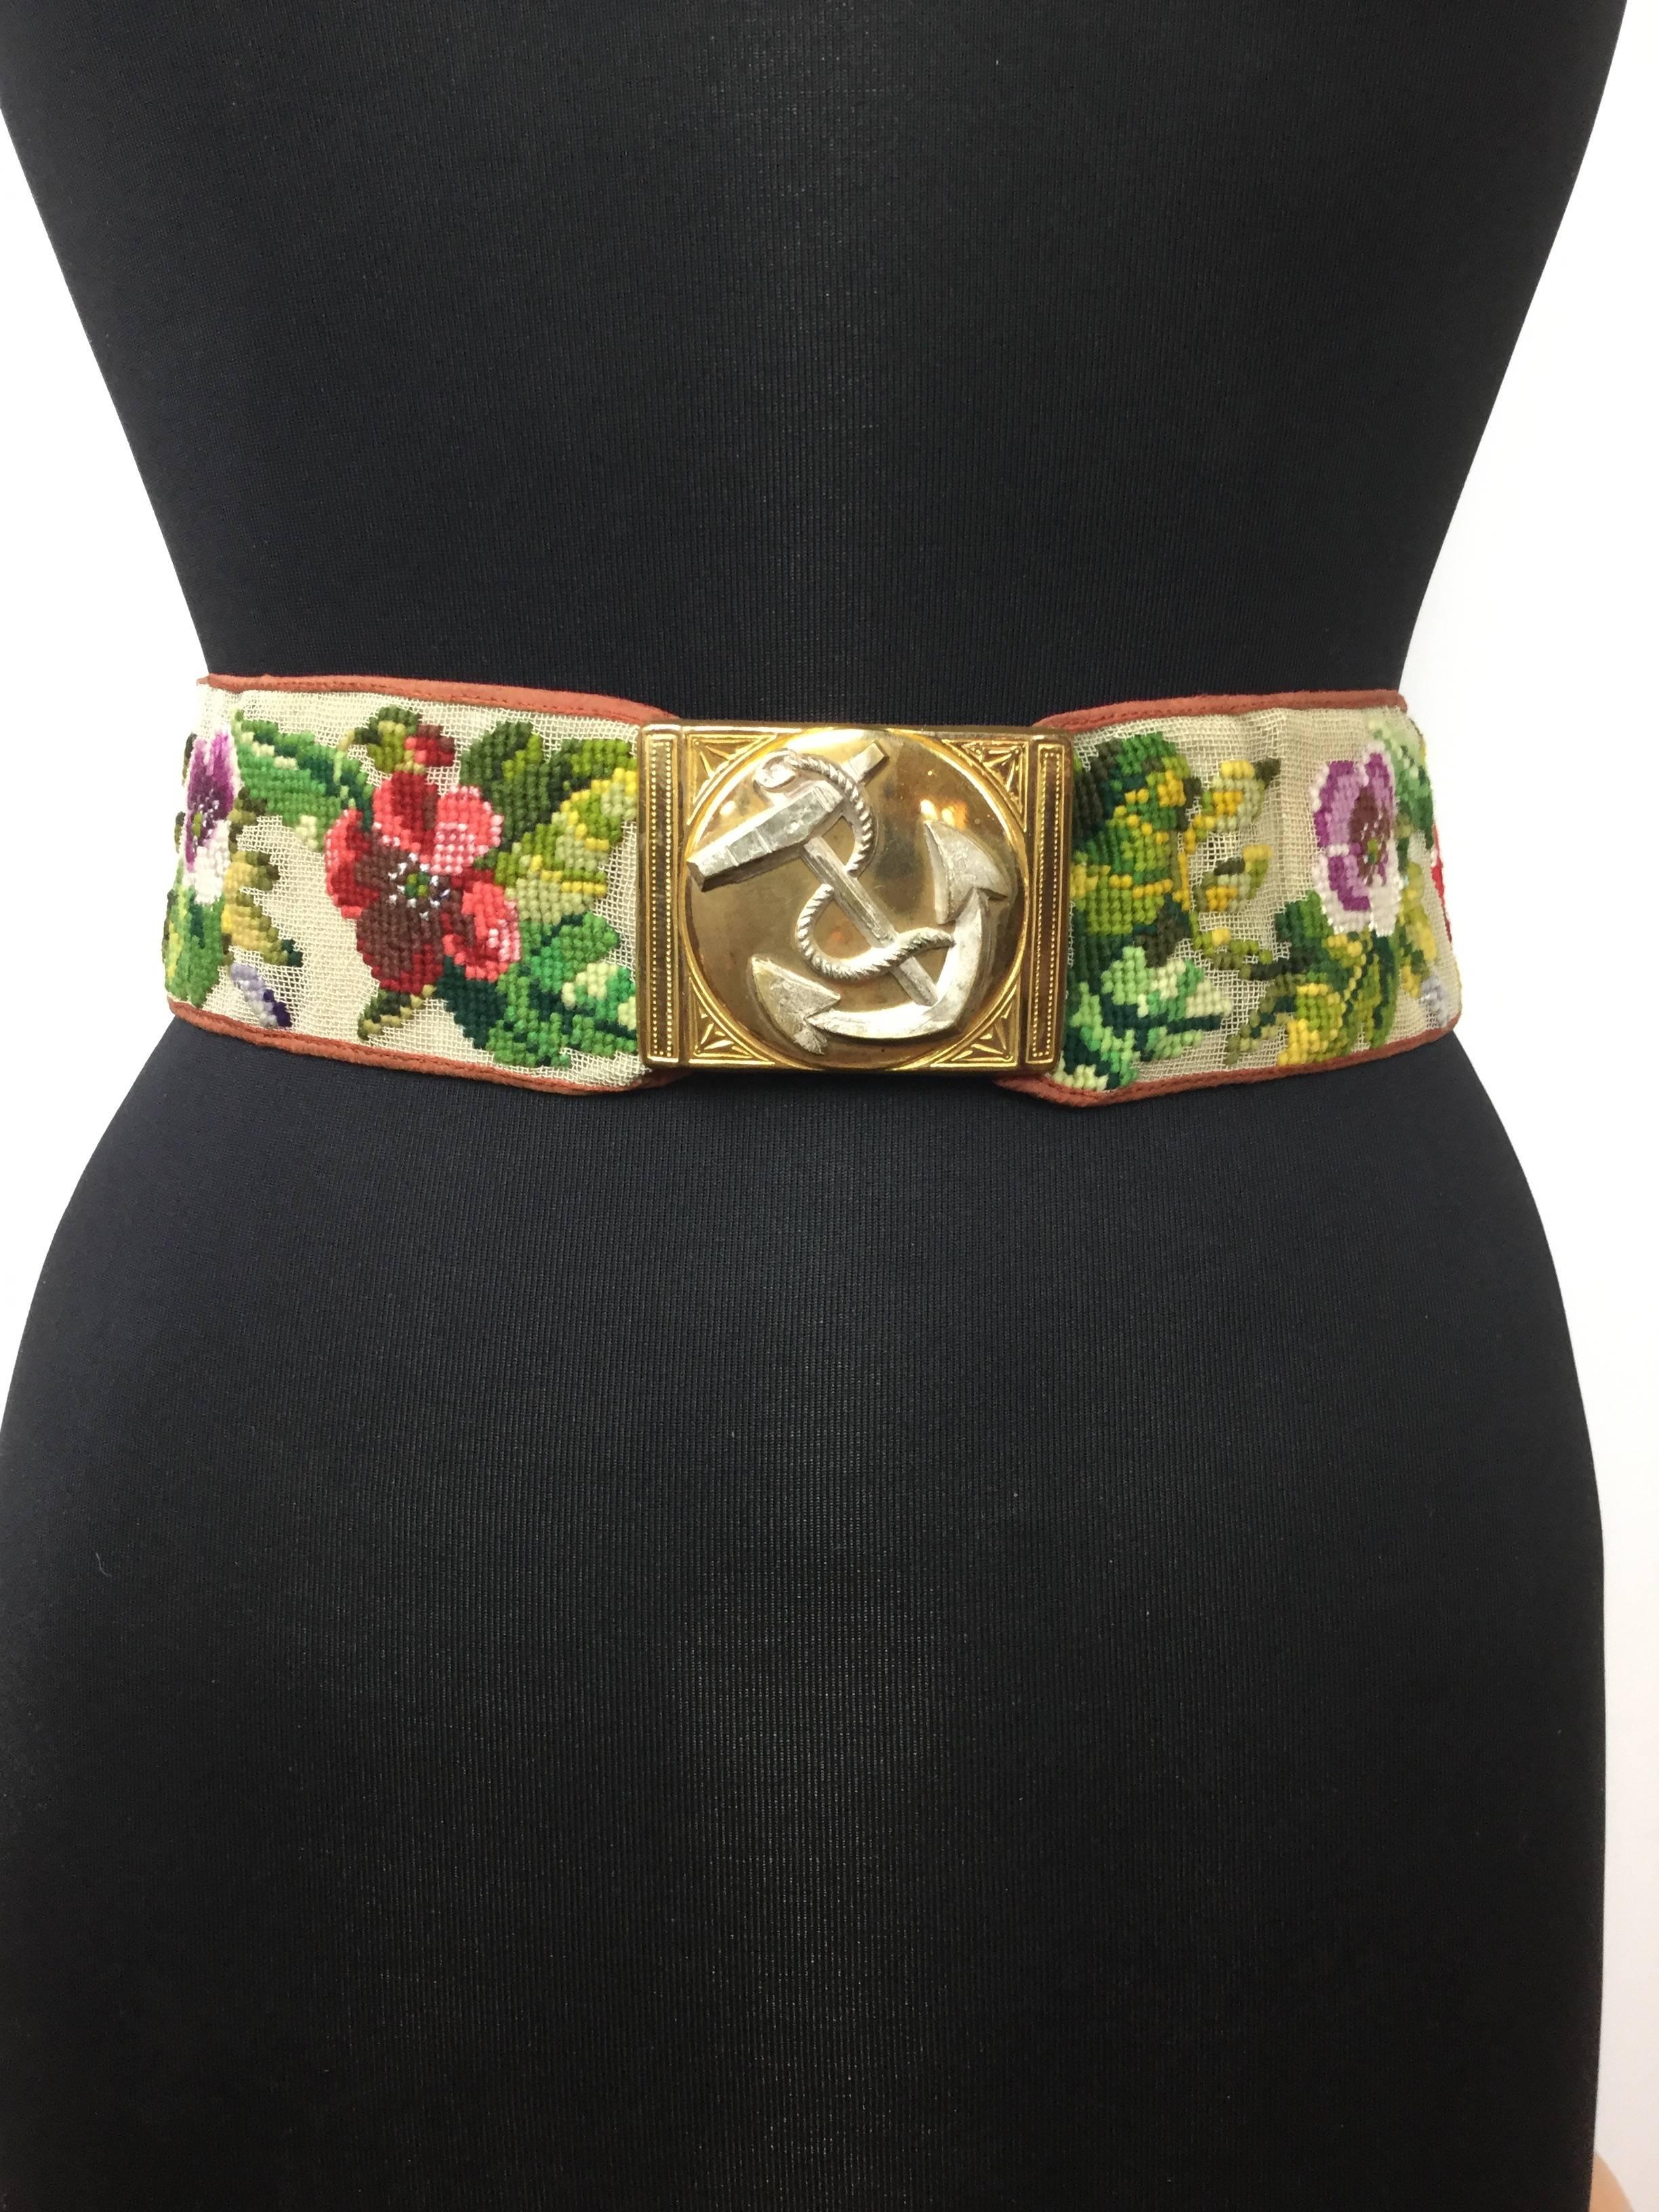 Rare Victorian Berlin Wool Work Floral Belt. Hand Stitched. 1870's. For Sale 2